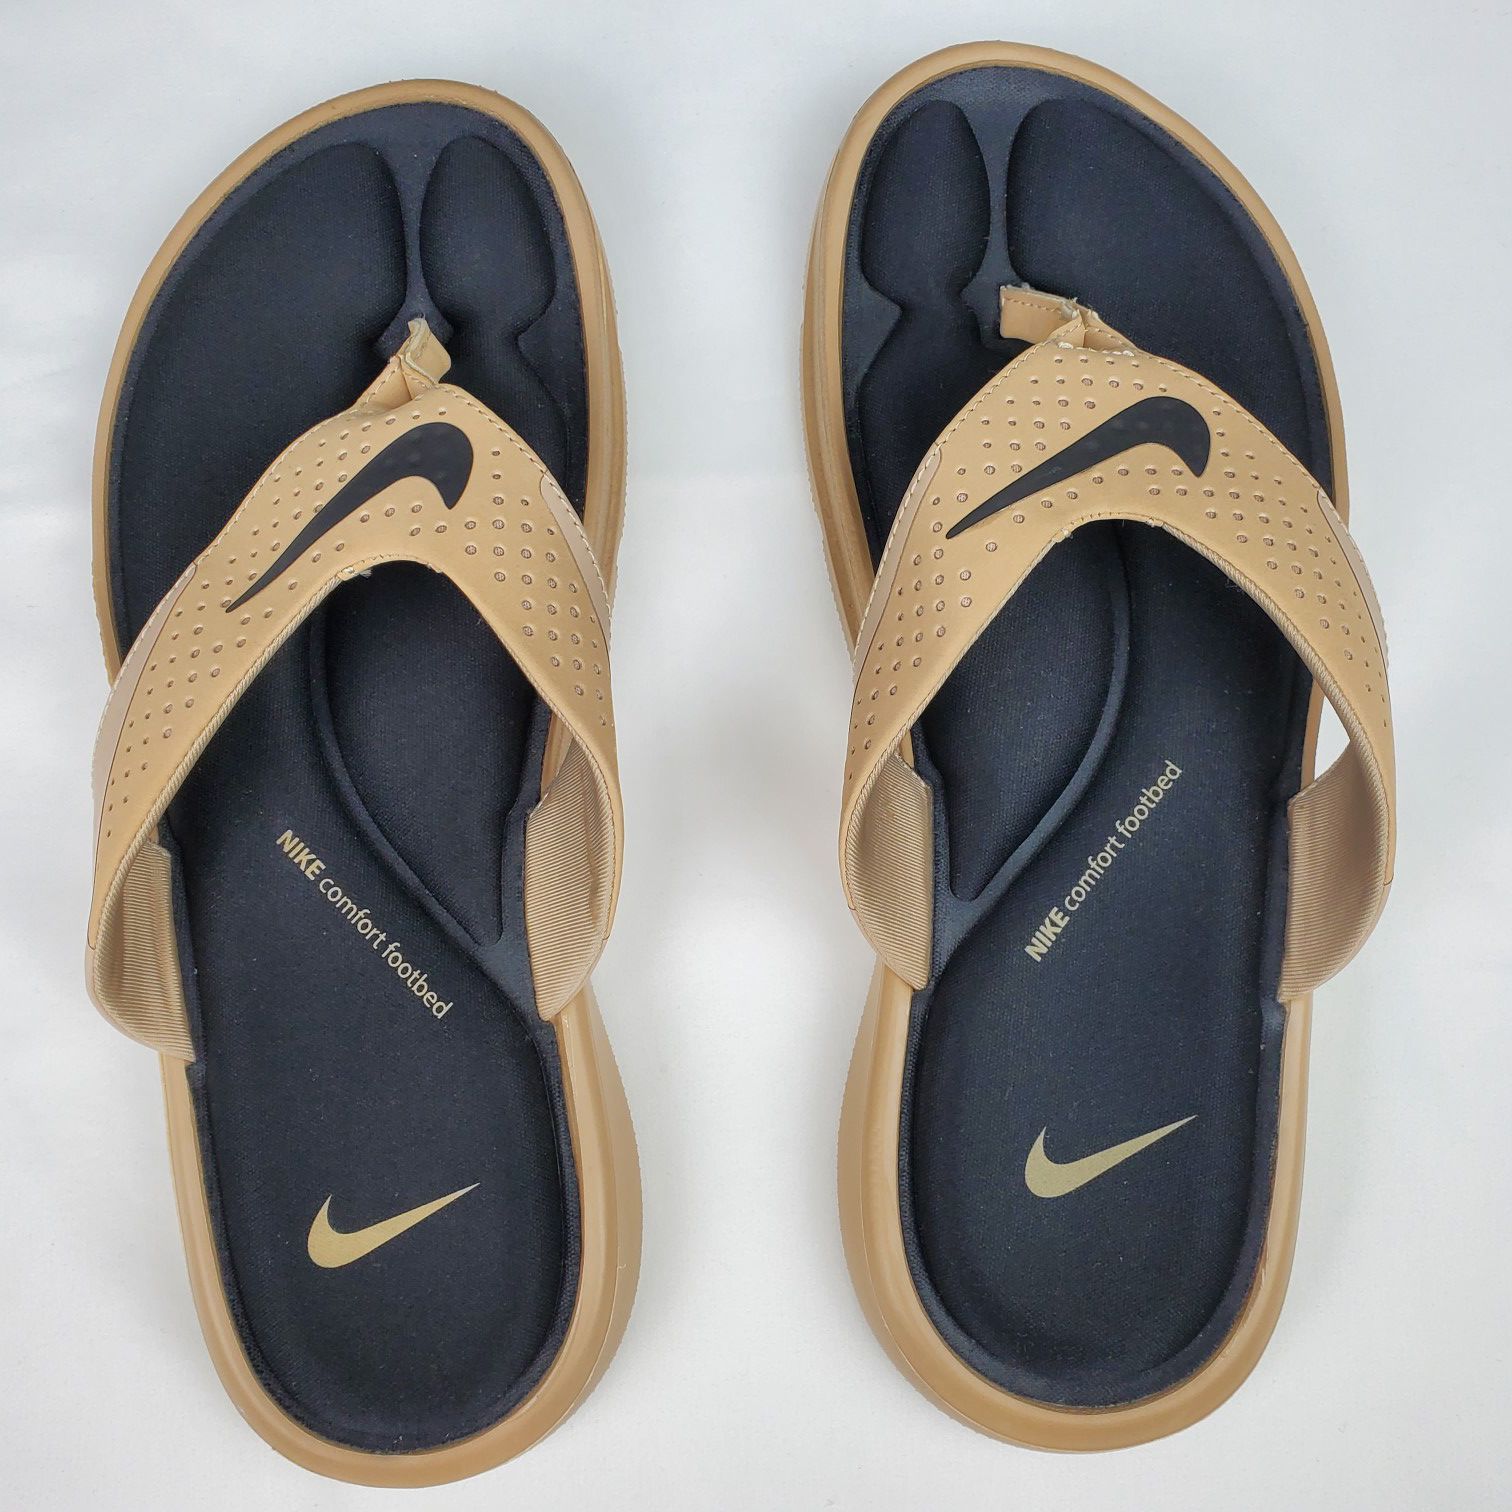 Nike Comfort Footbed Women's Sandals Size 9 US Flops Color Beige Thongs for Sale in Houston, - OfferUp